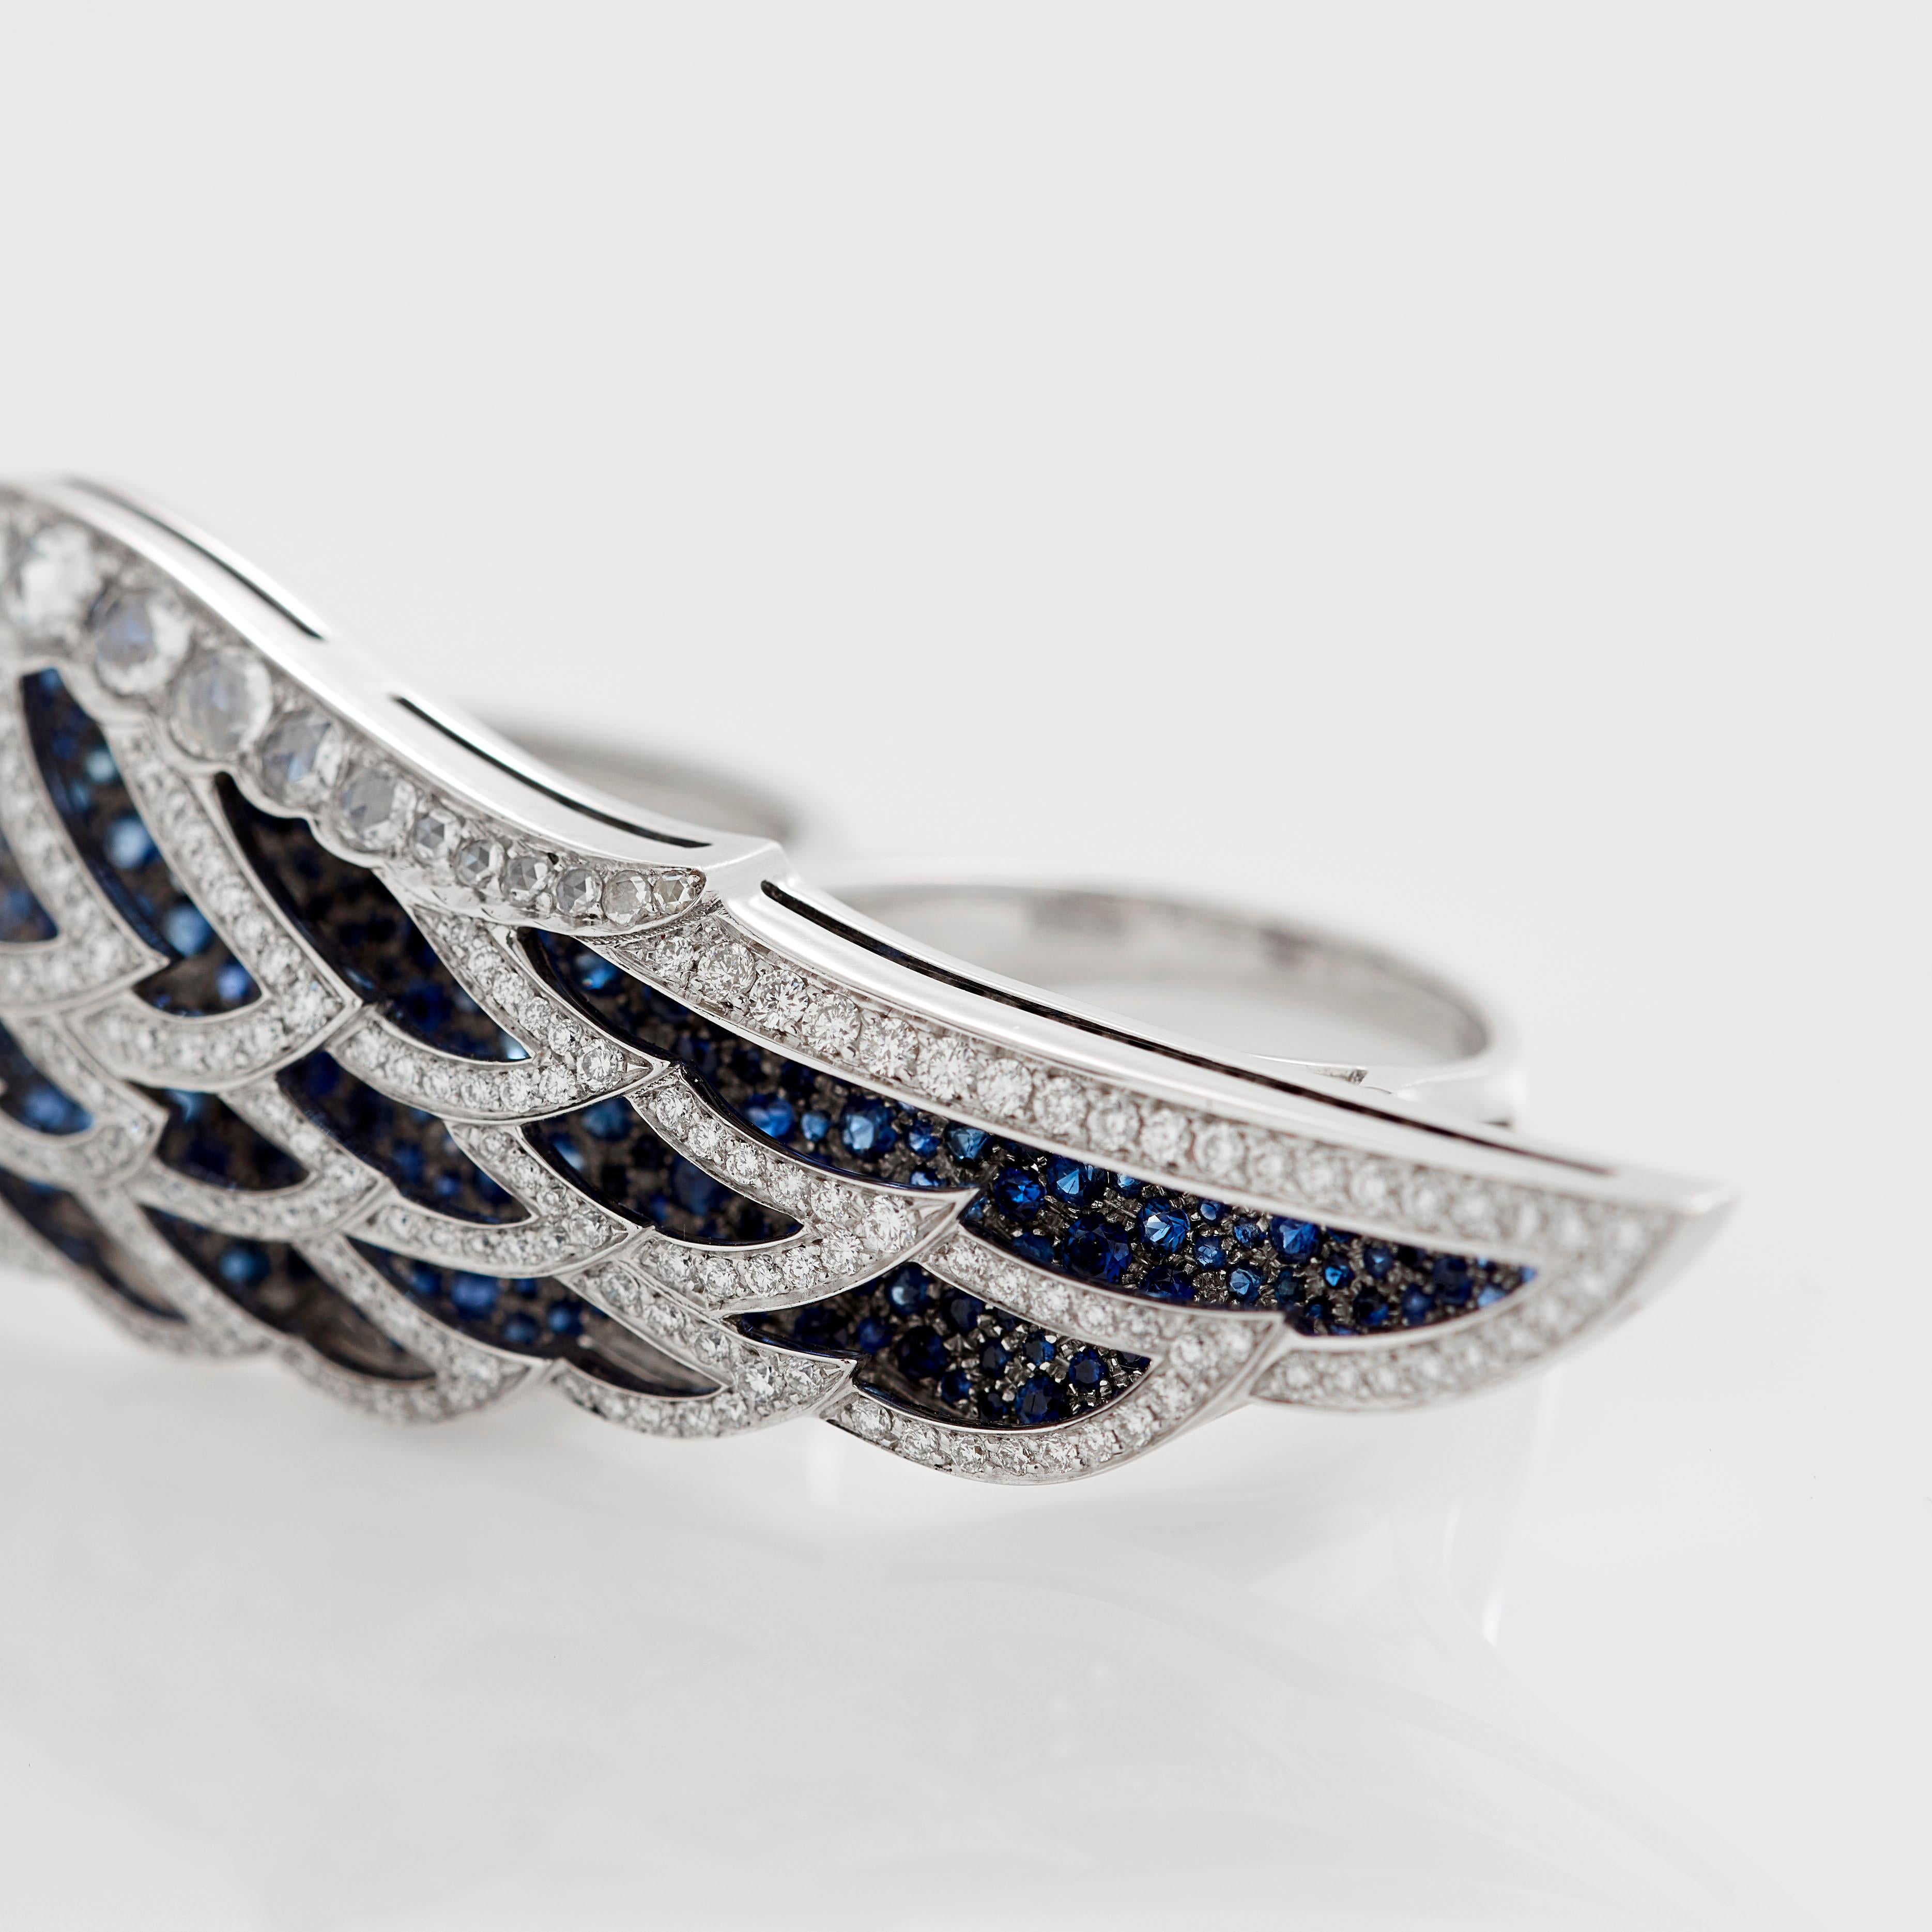 Garrard 'Wings Lace' 18 Karat White Gold White Diamond and Sapphire Double Ring For Sale 2